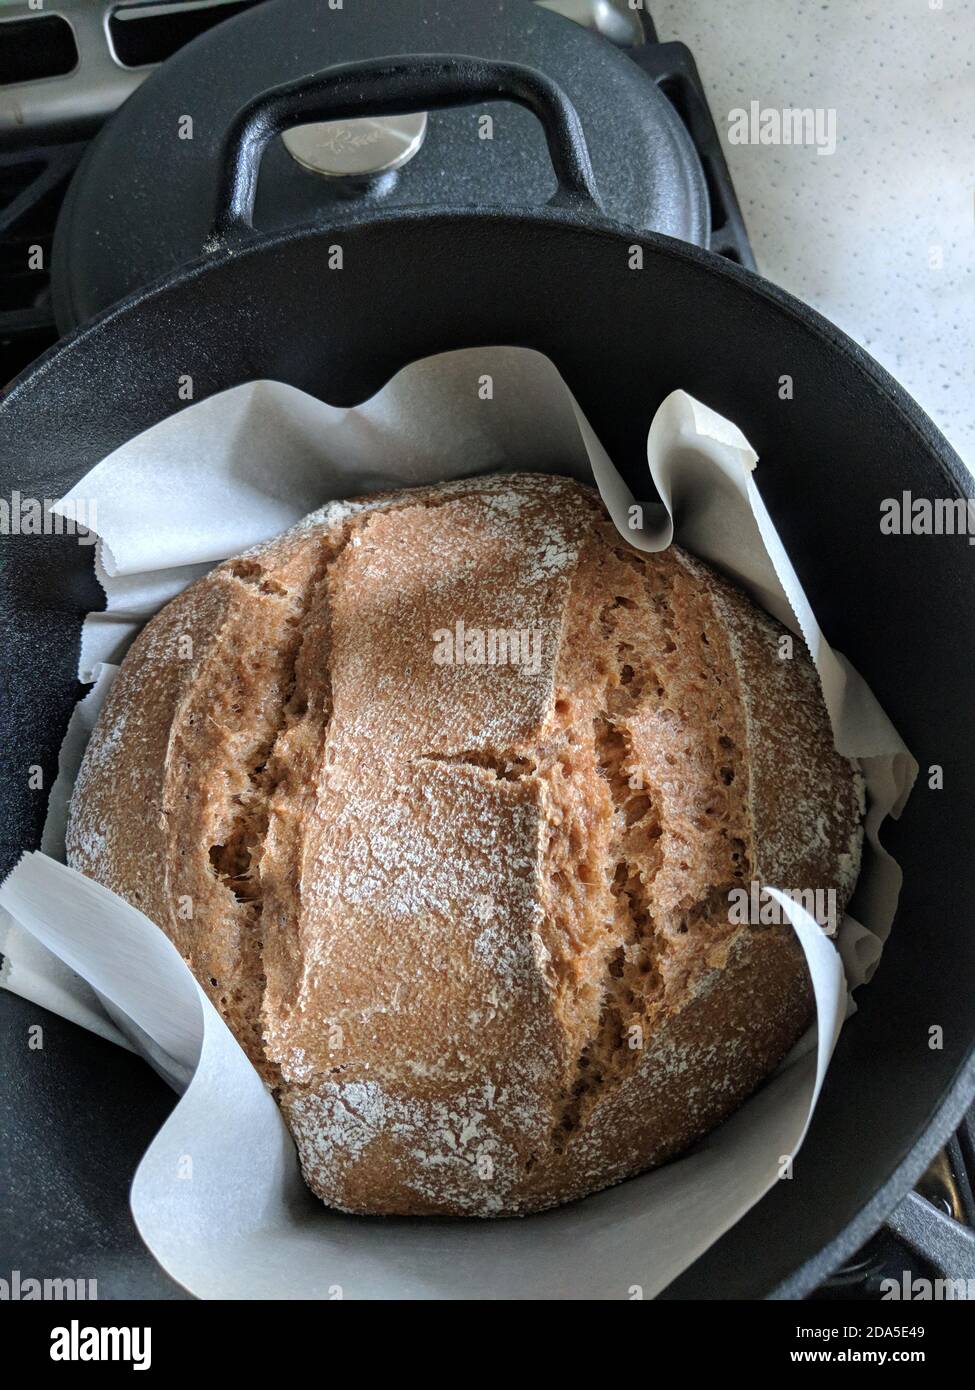 https://c8.alamy.com/comp/2DA5E49/freshly-made-loaf-of-round-bread-in-the-black-cast-iron-oven-pan-with-a-lid-on-the-side-homemade-bread-with-cuts-on-the-side-laying-on-a-parchment-pa-2DA5E49.jpg